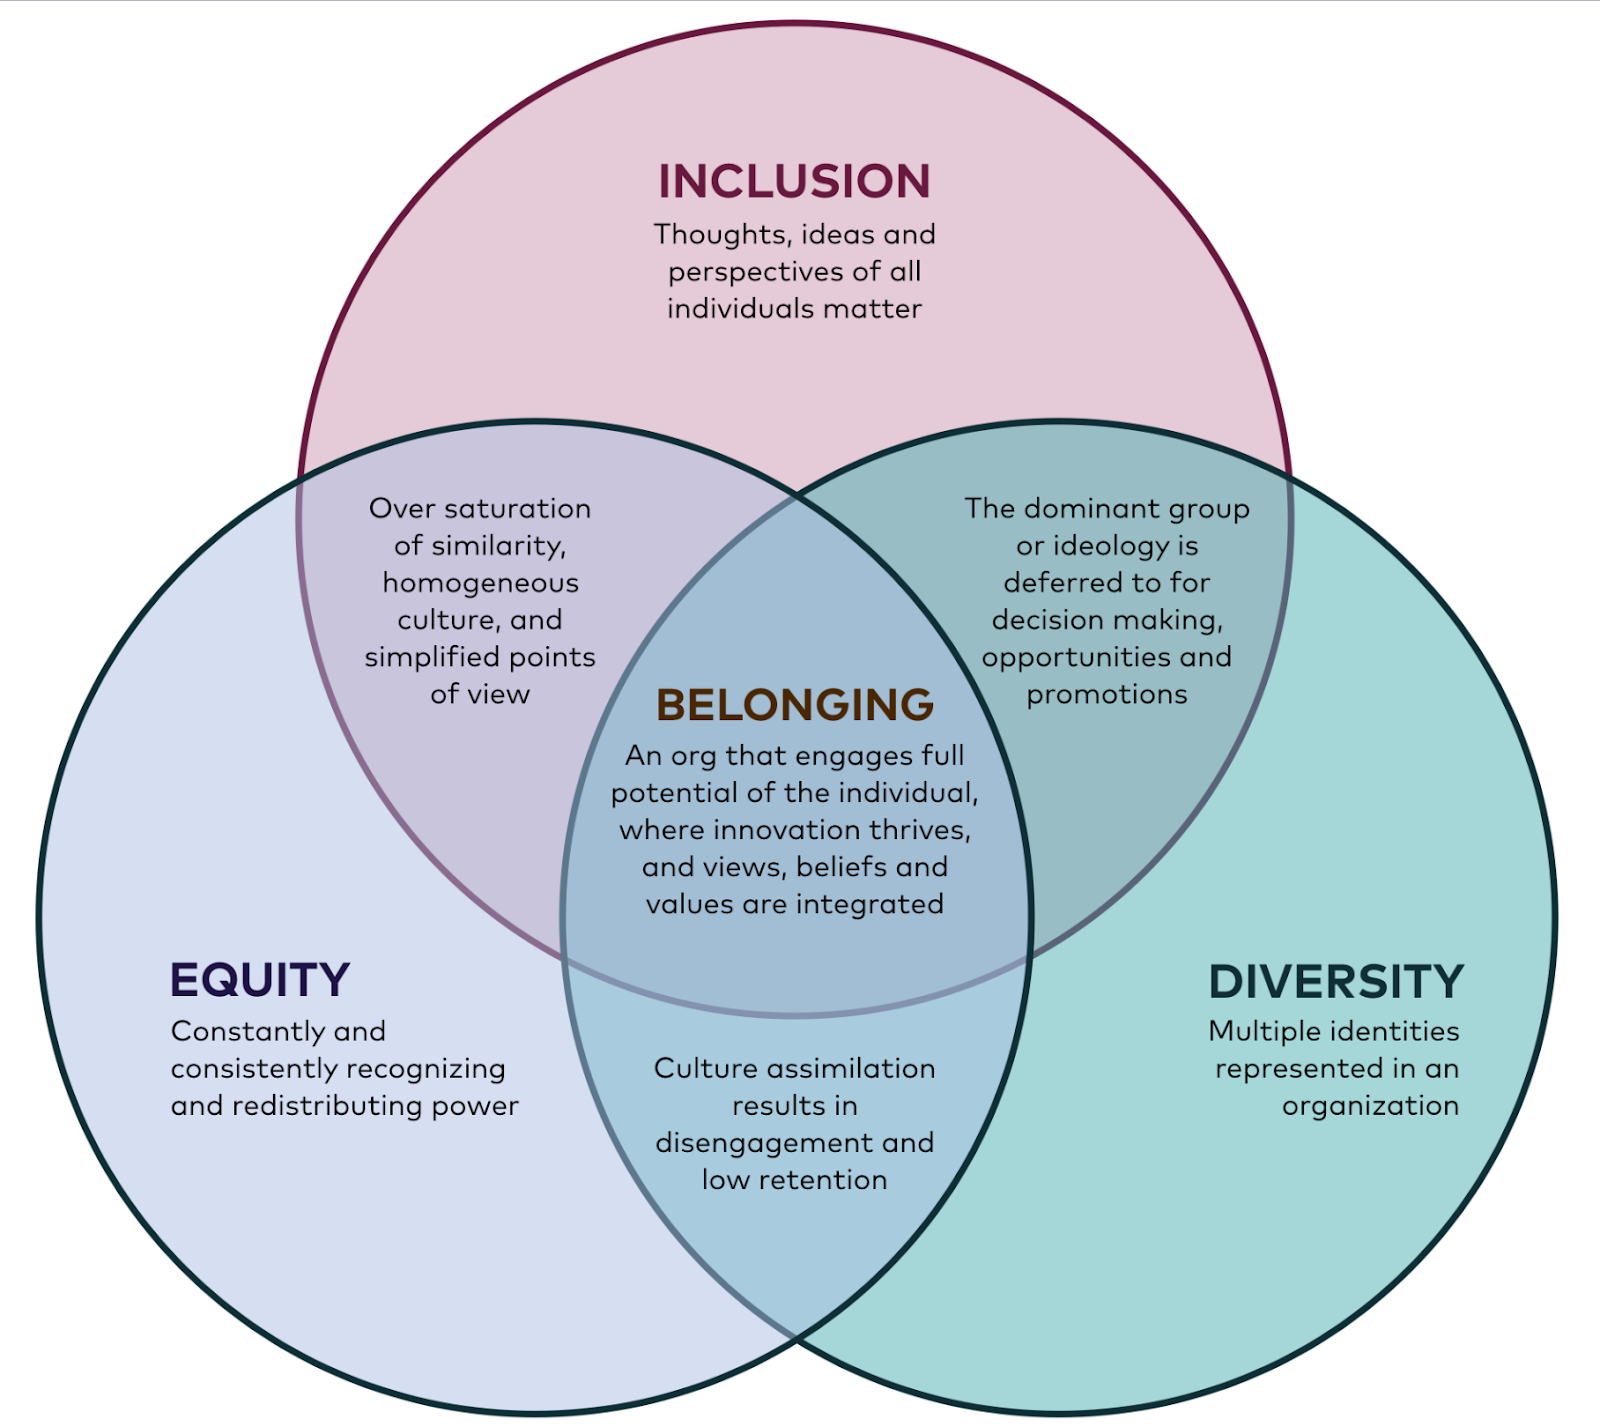 A Venn diagram that shows the intersection of 3 circles representing Inclusion, Equity and Diversity. The point where all three intersect is labeled 'Belonging'.